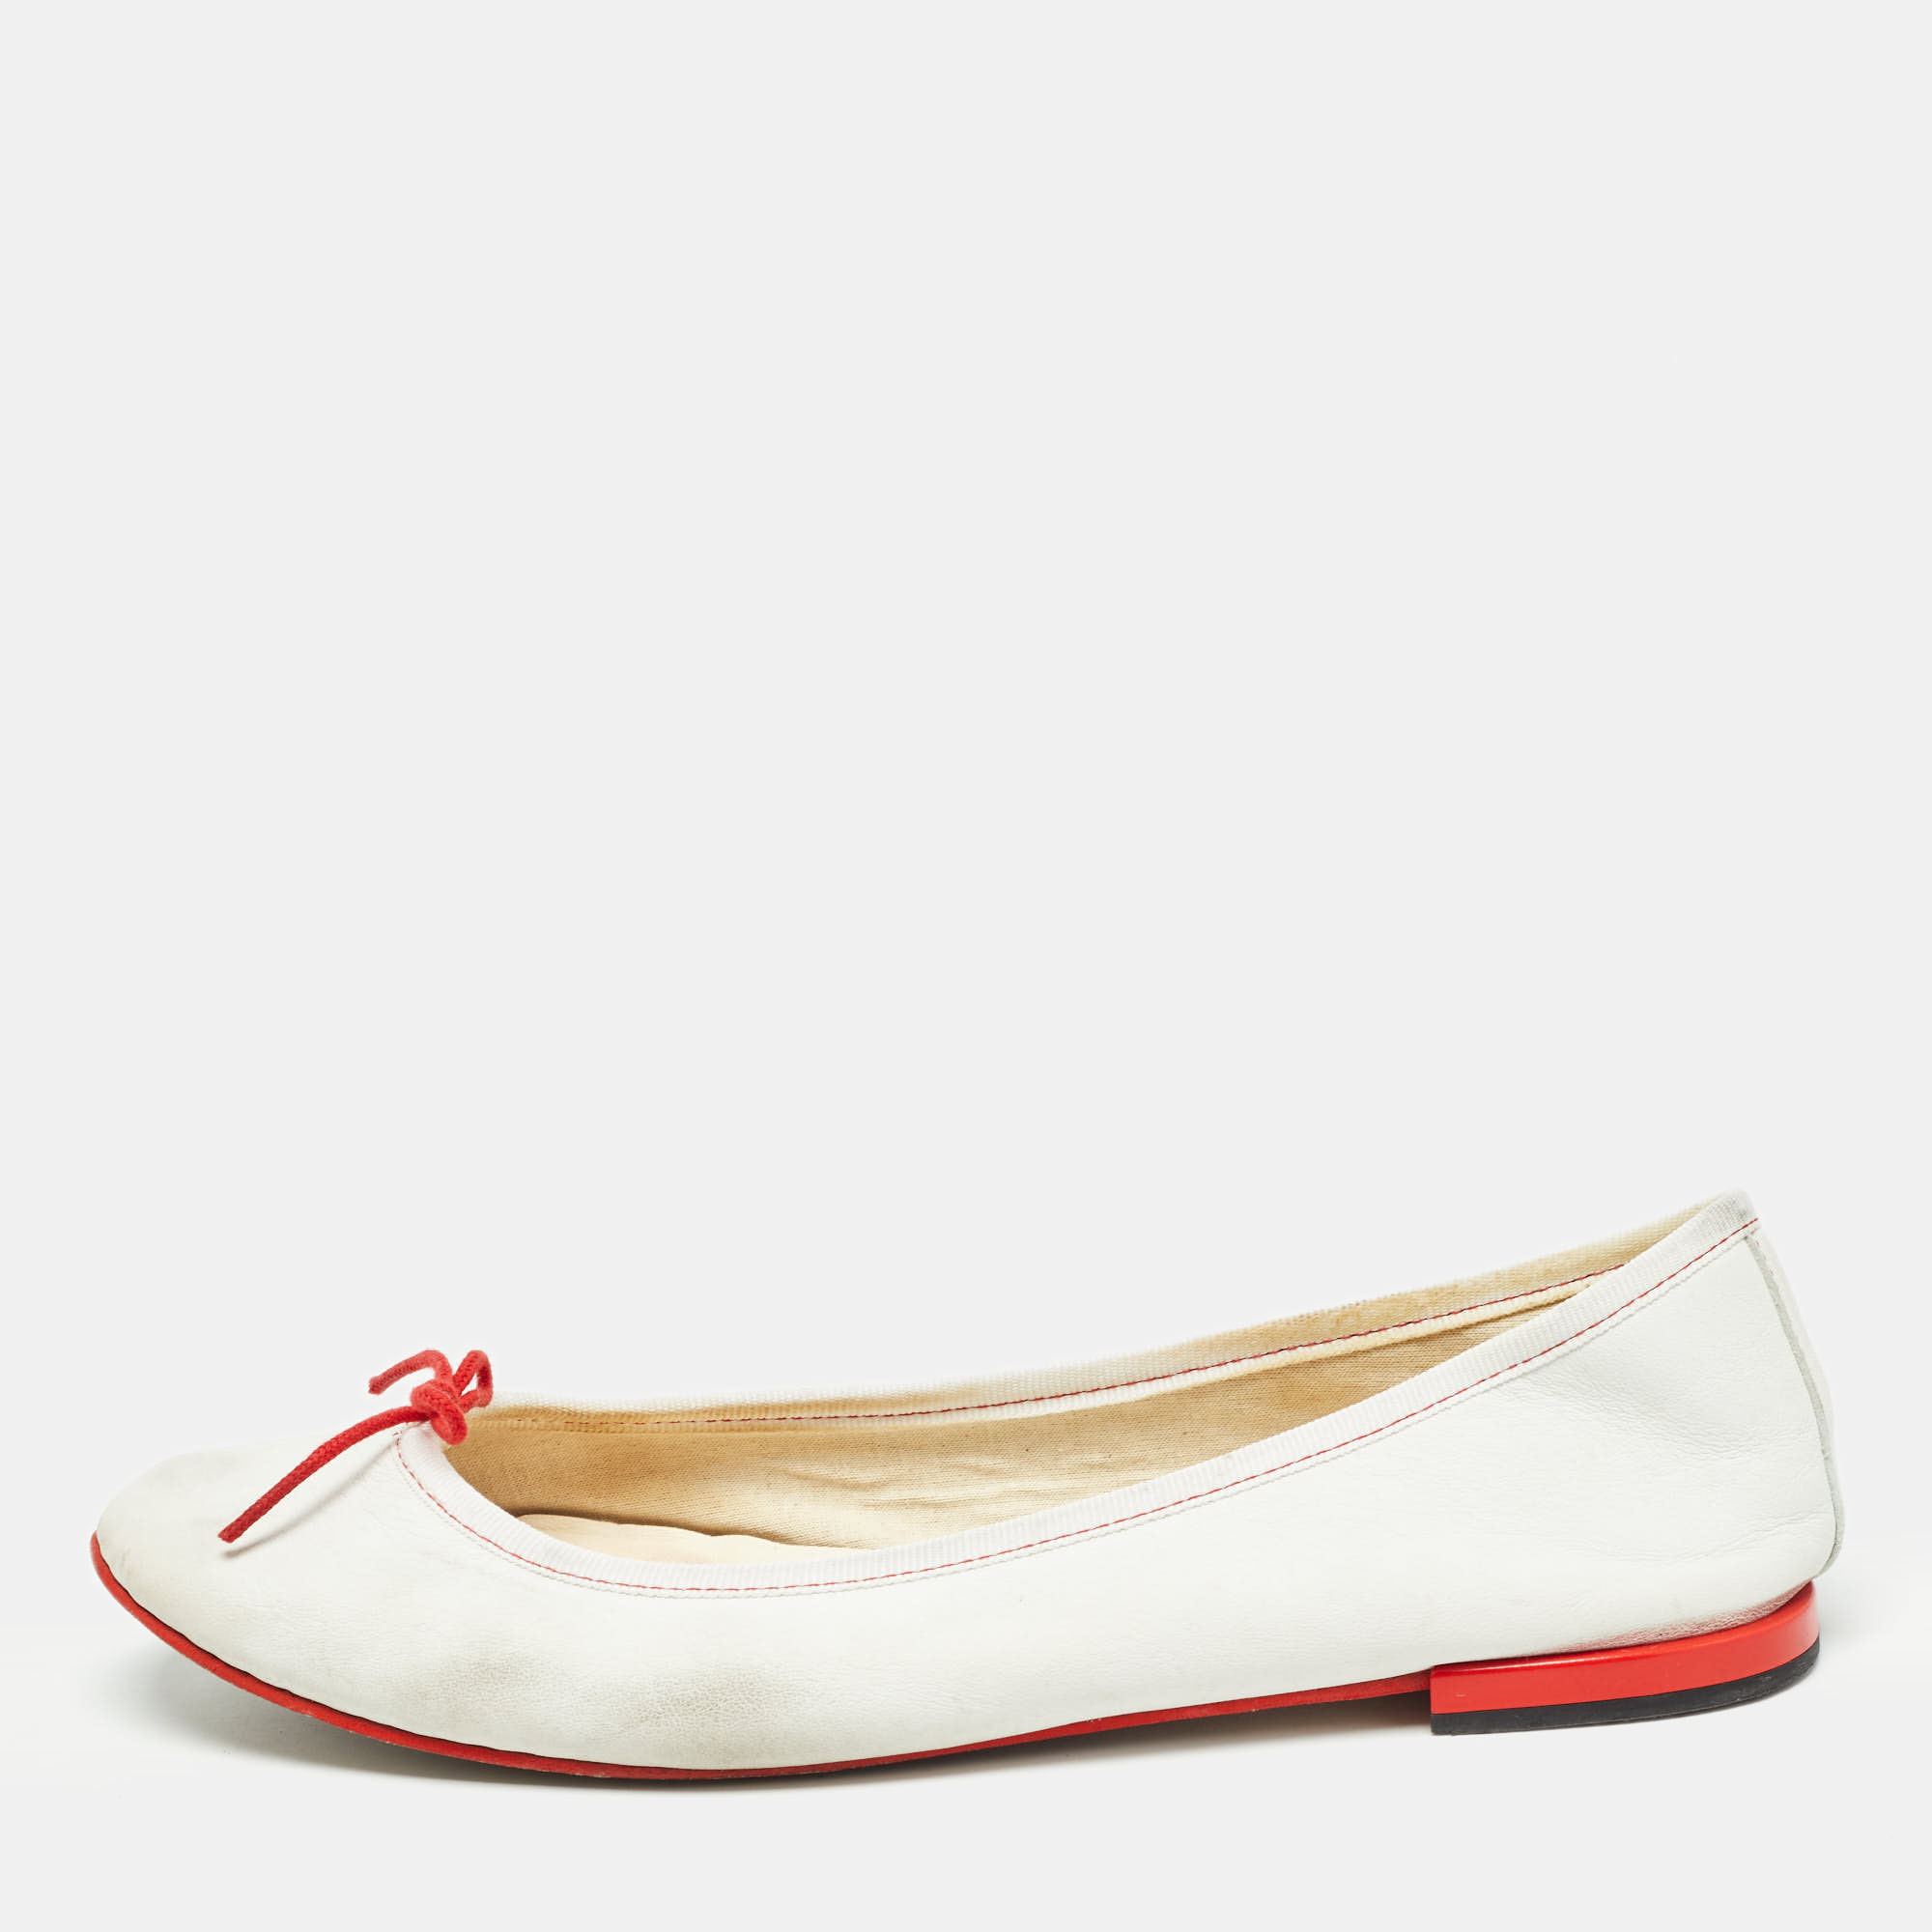 Pre-owned Repetto White Leather Bow Ballet Flats Size 39